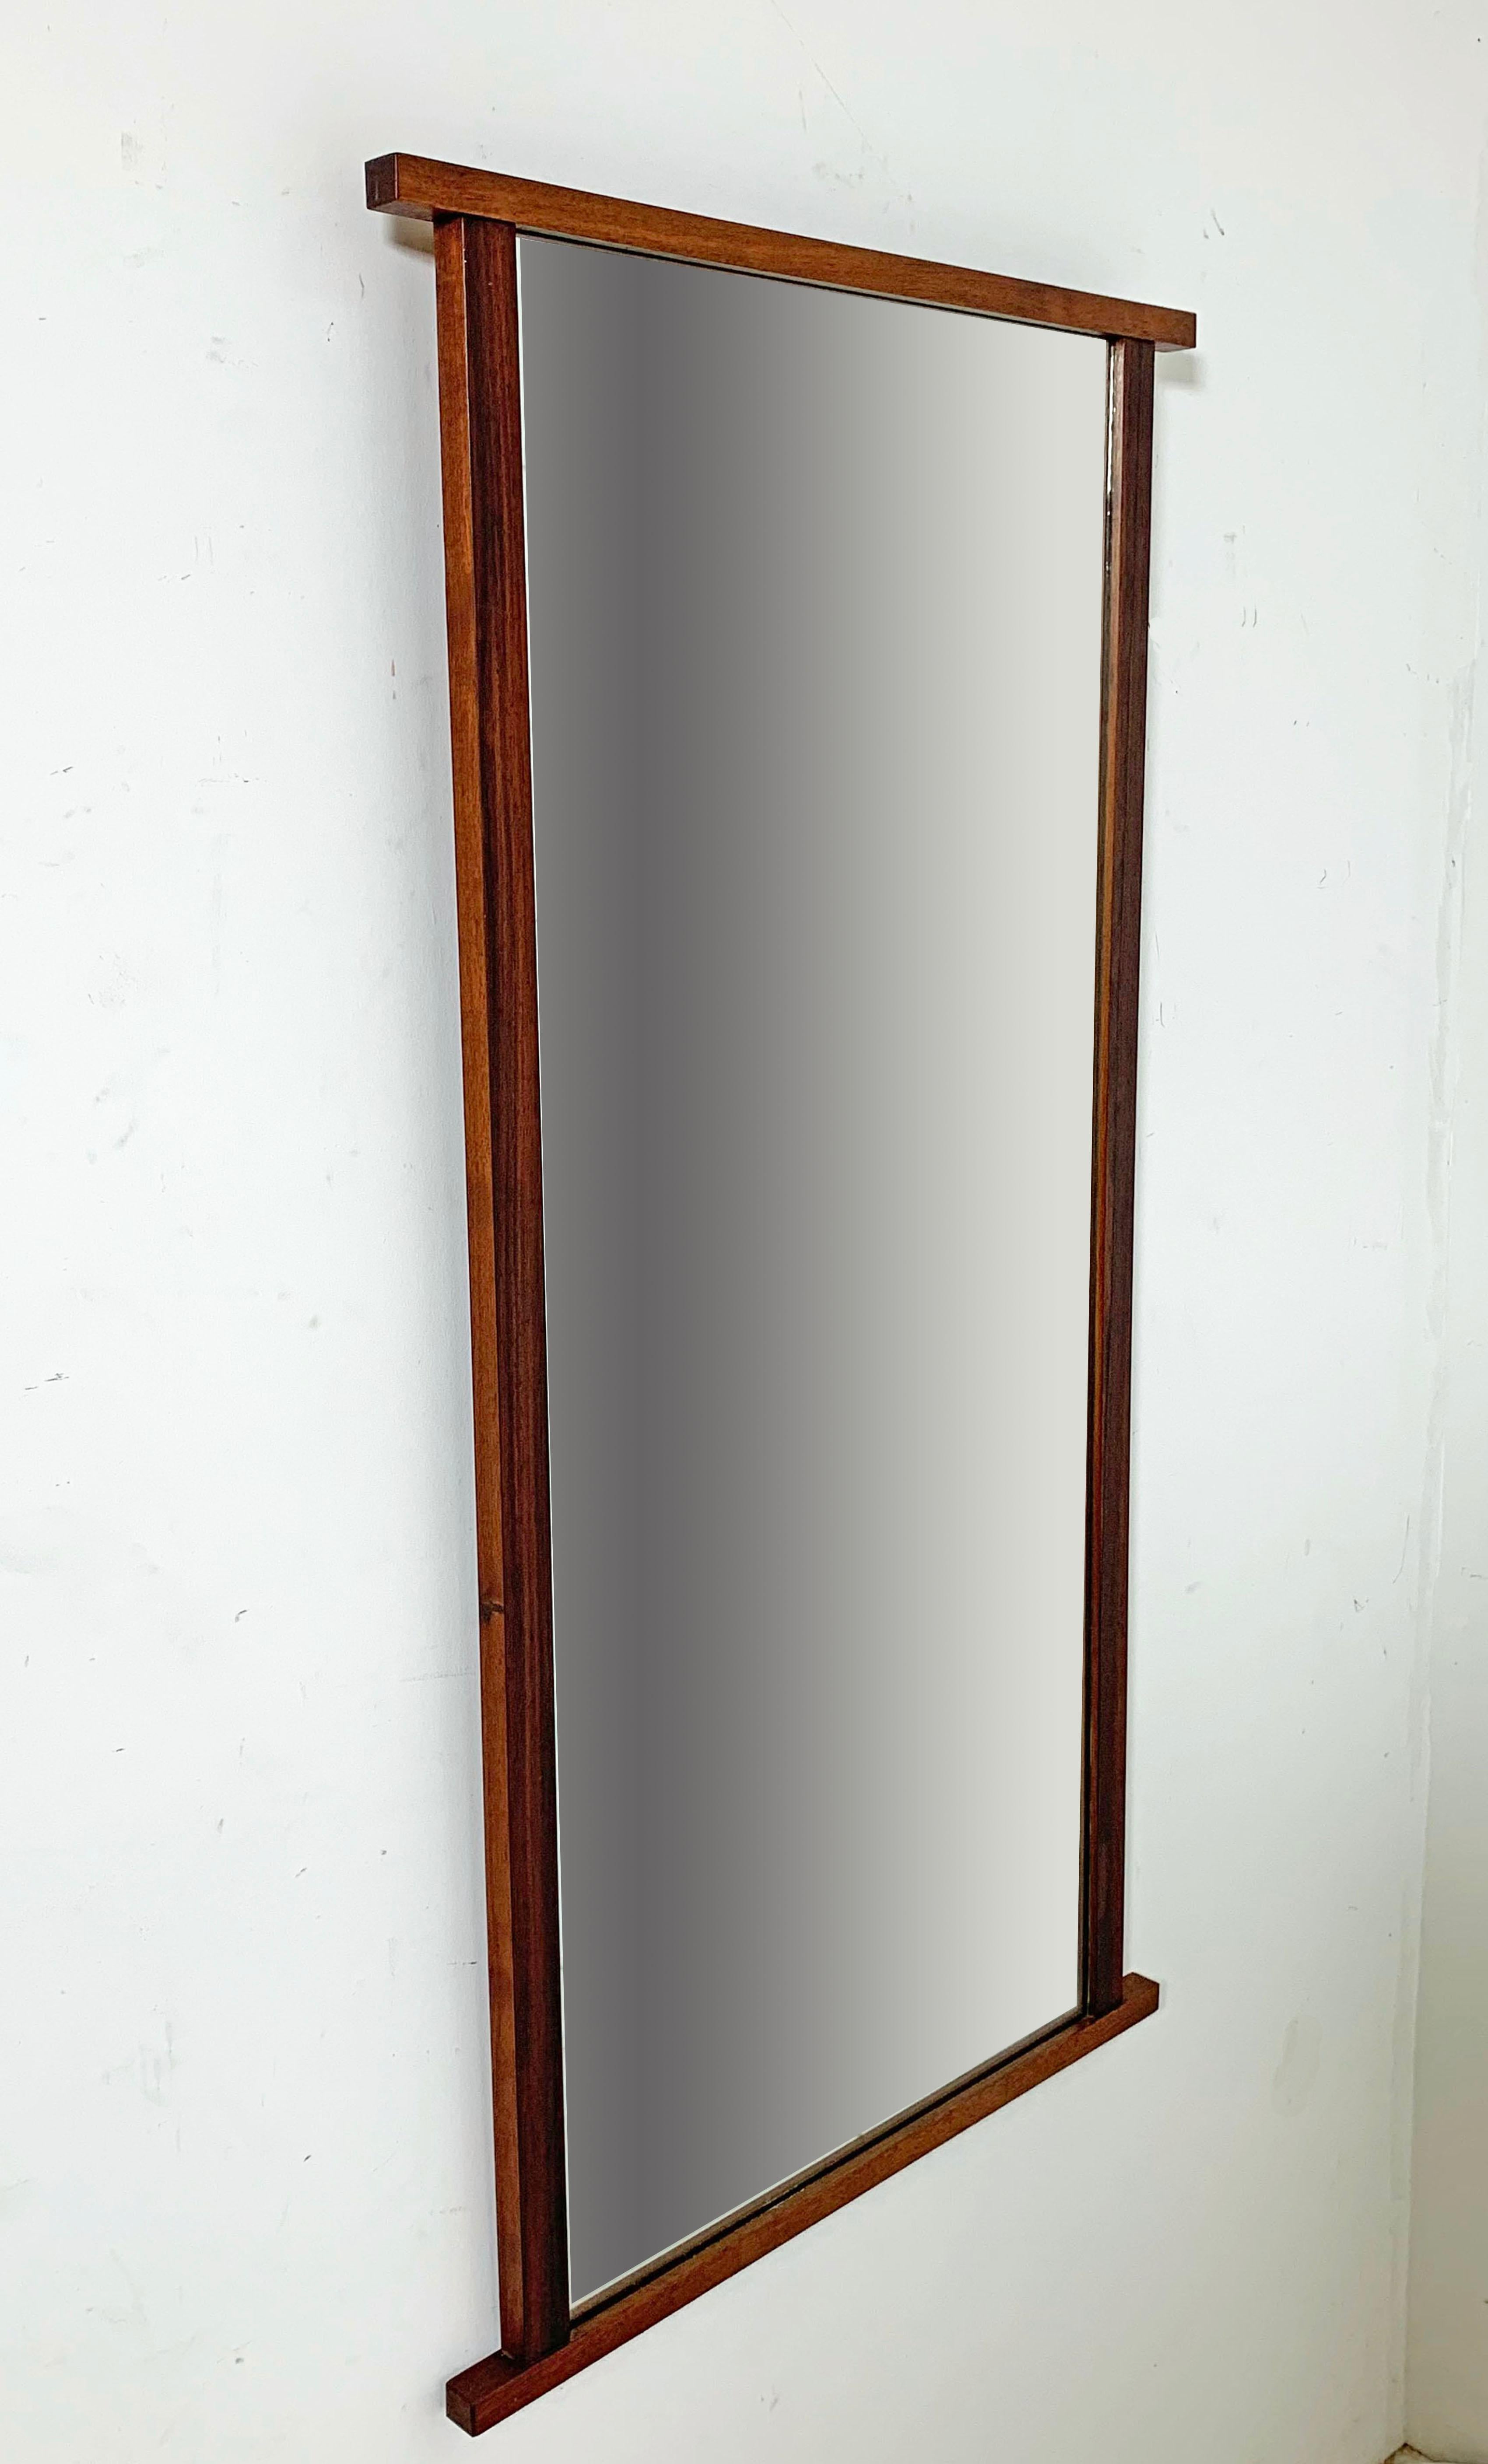 An architectural mirror in solid walnut from the 1959 American Design Foundation collection by Kipp Stewart and Stewart MacDougal for Calvin Furniture. Can be oriented vertically or horizontally.